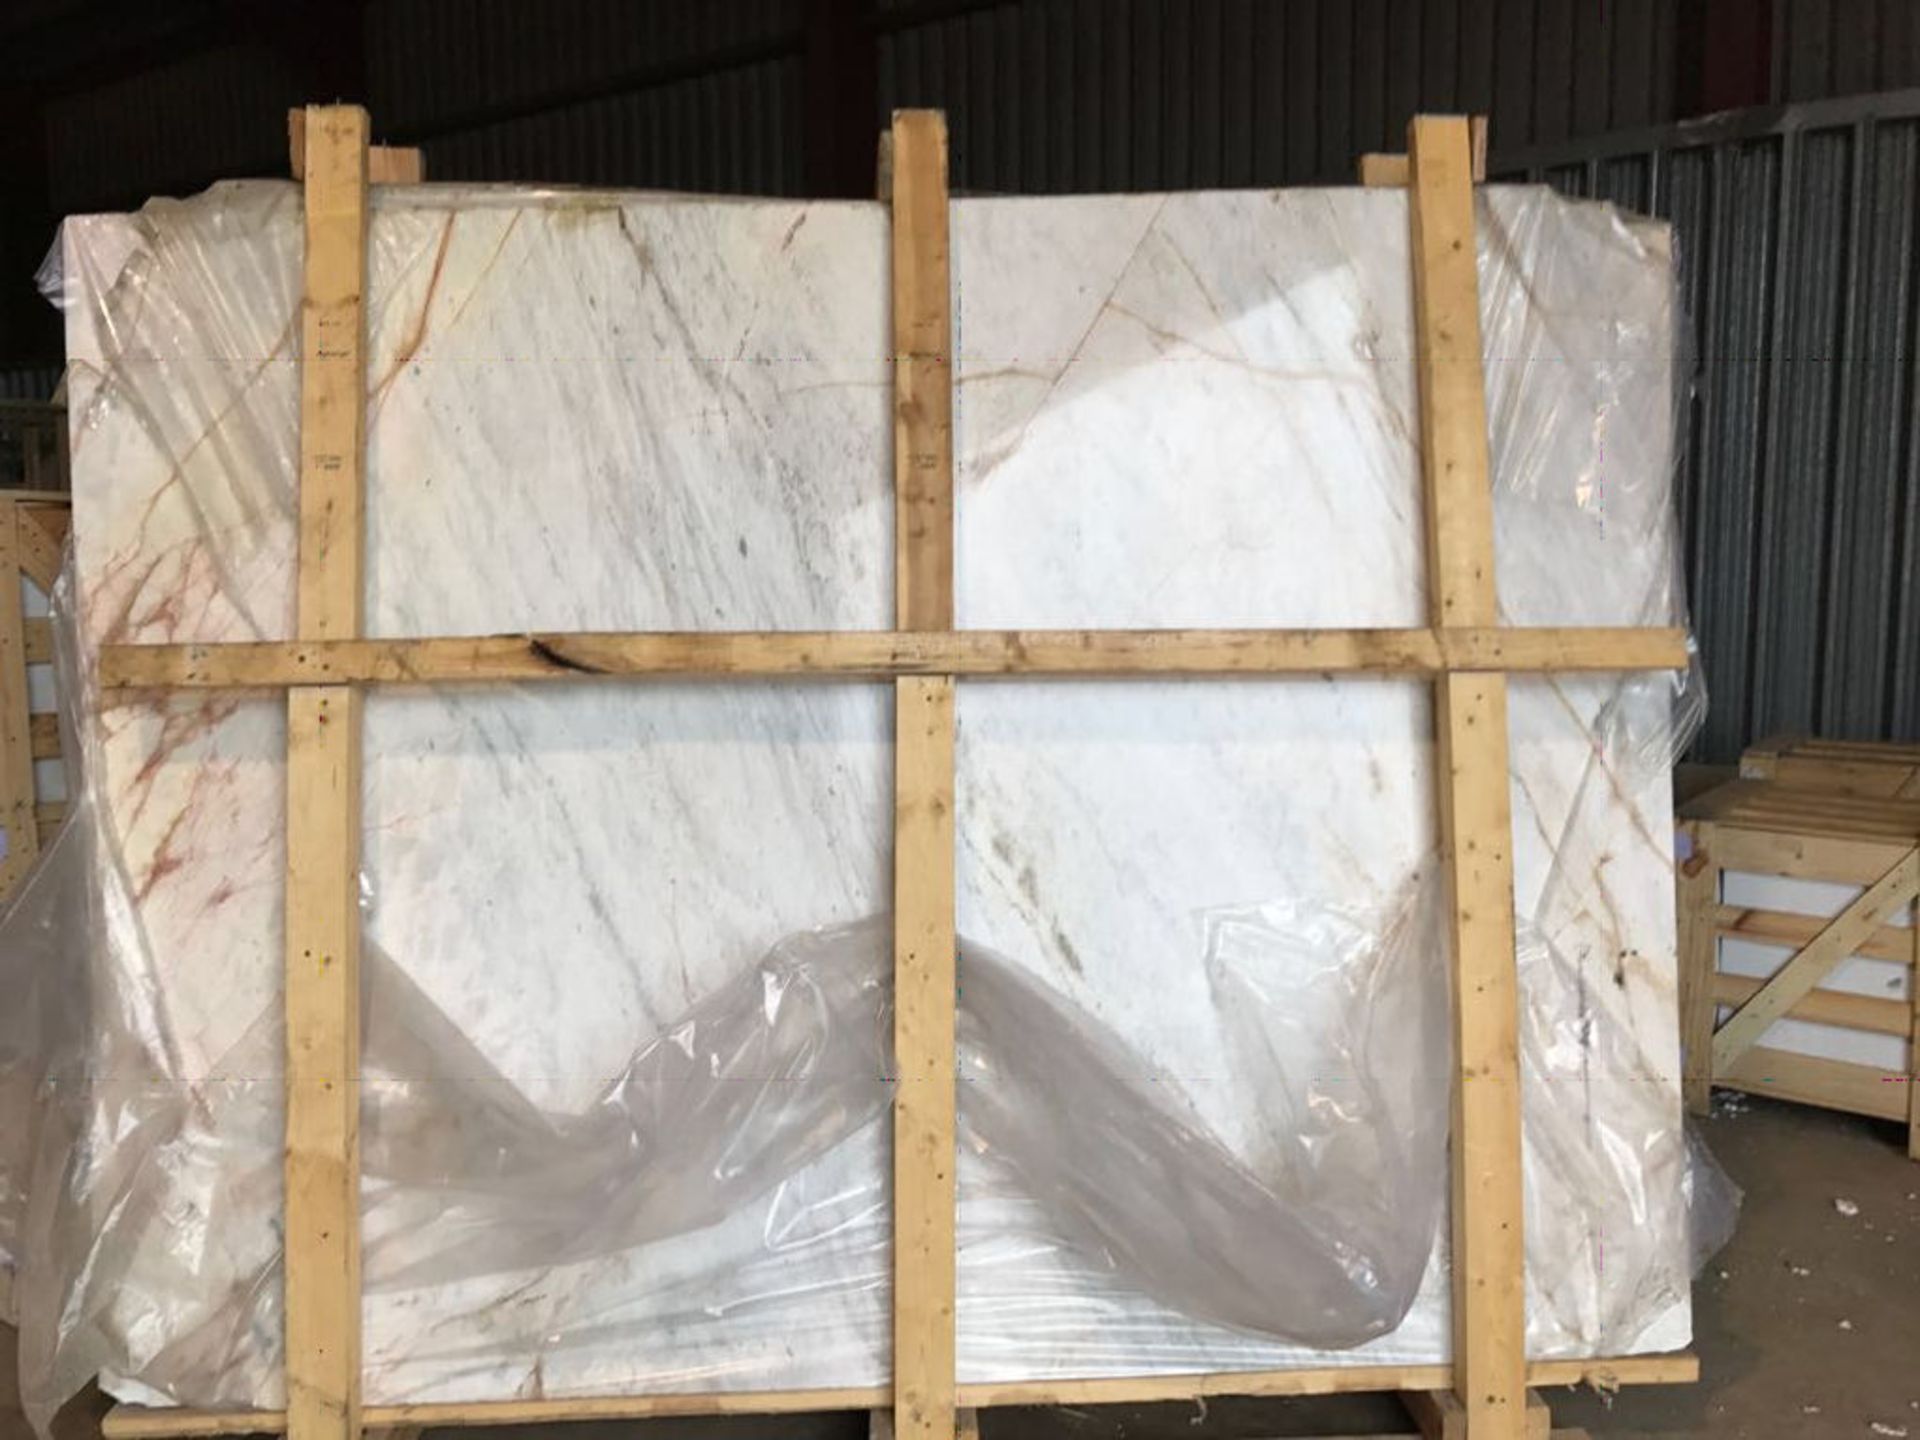 1 x Calacatta Marble Sheet - Approx. 2.5 x 1.5m Each - 20mm Thick - CL312 - Location: